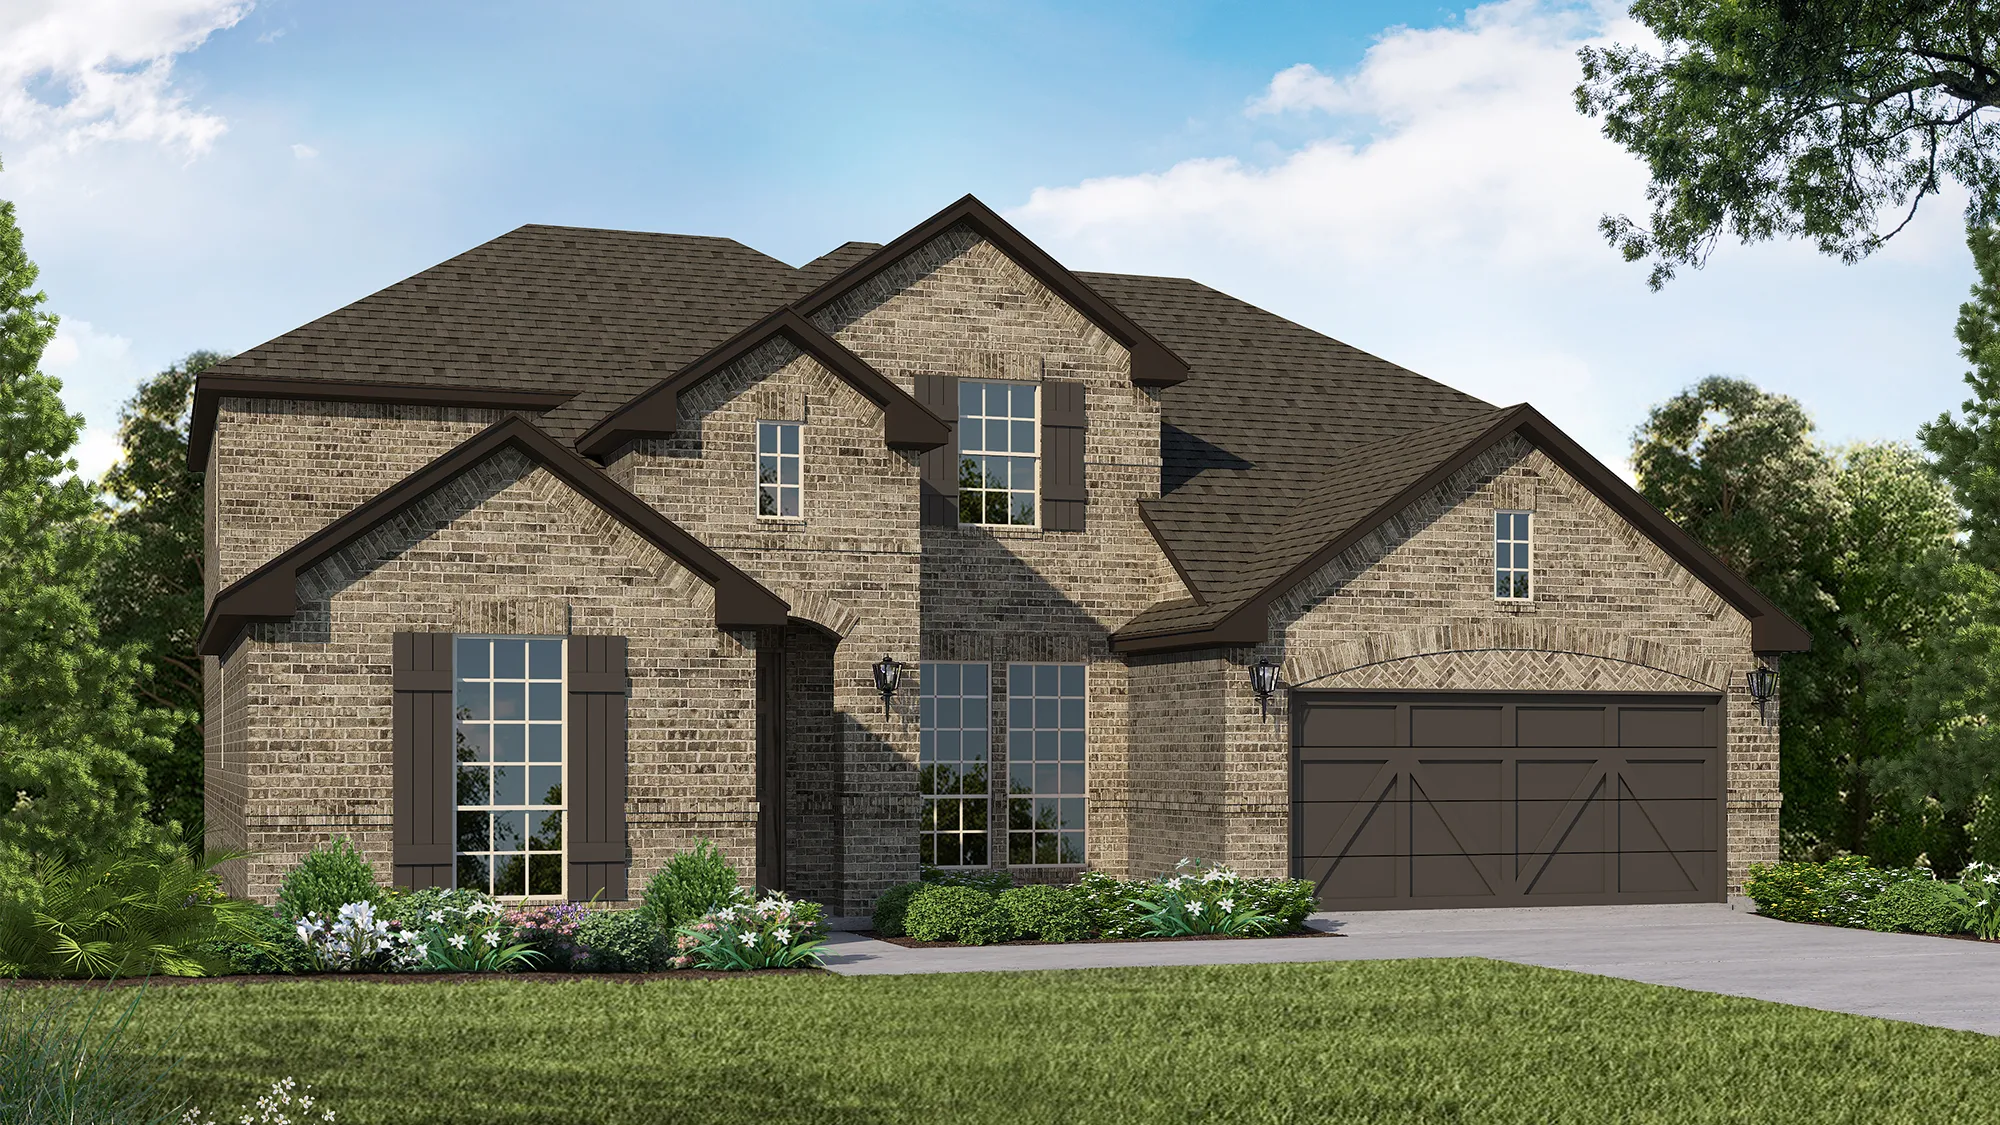 Plan 1686 Elevation A by American Legend Homes